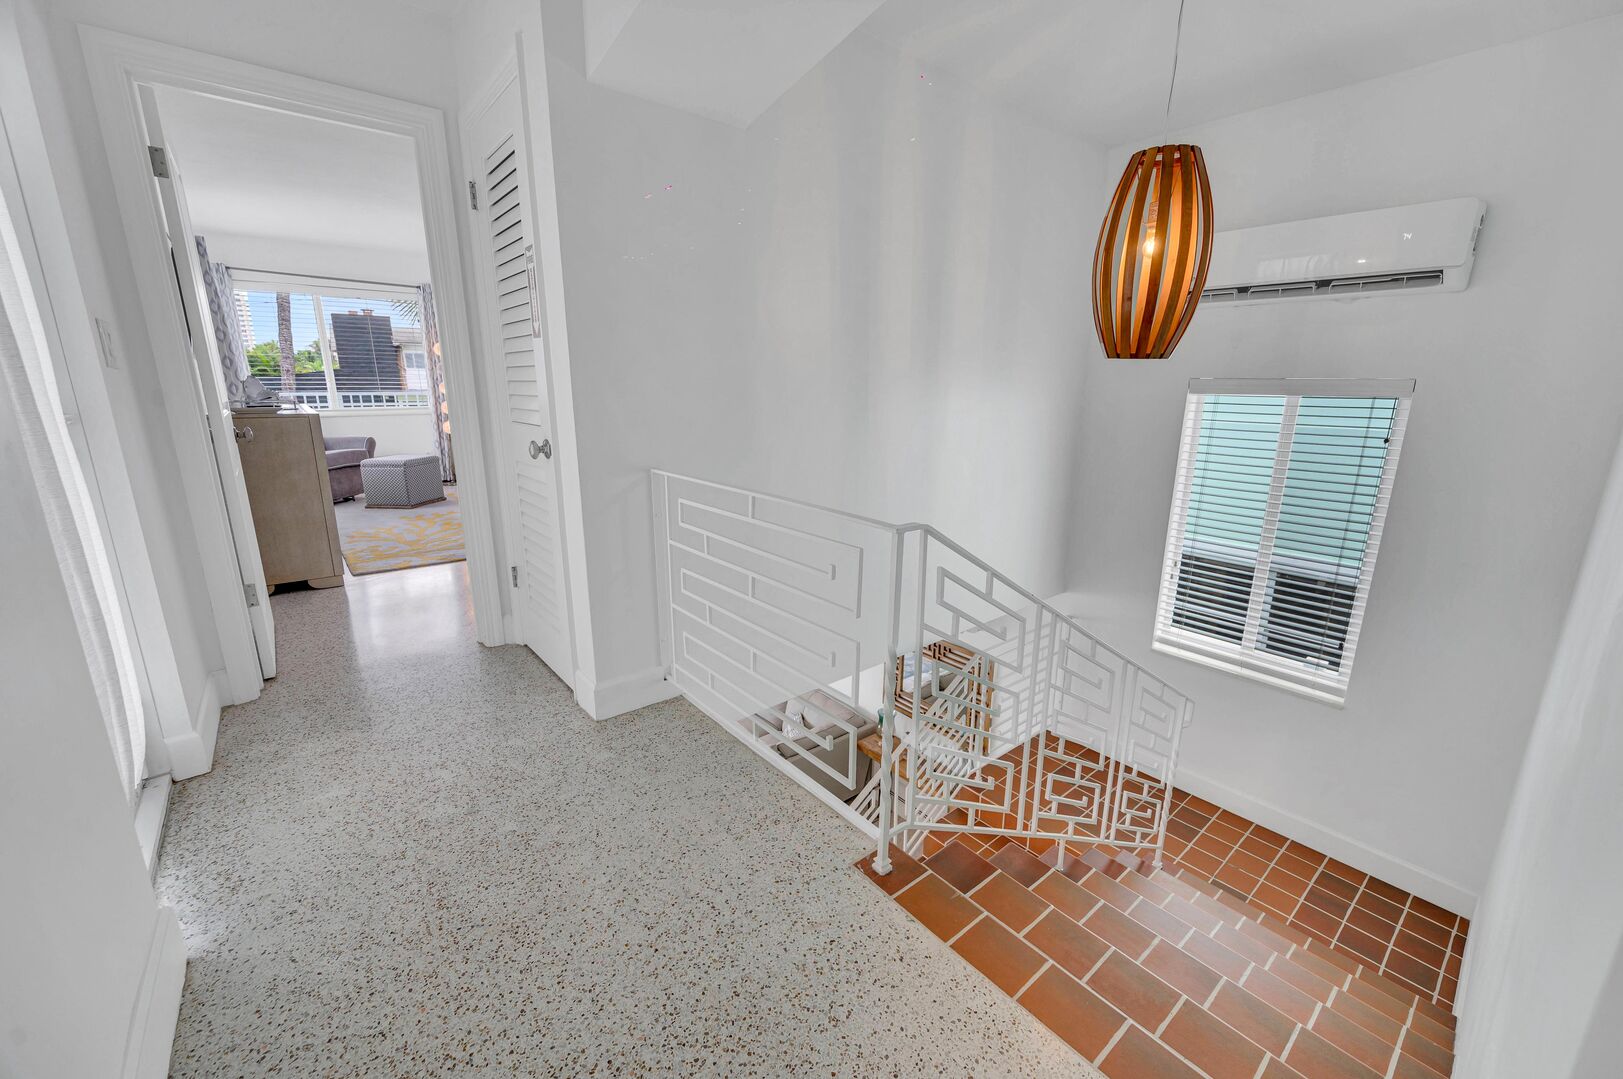 Make your way up the stairs to two more bedrooms and a second outdoor dining area.